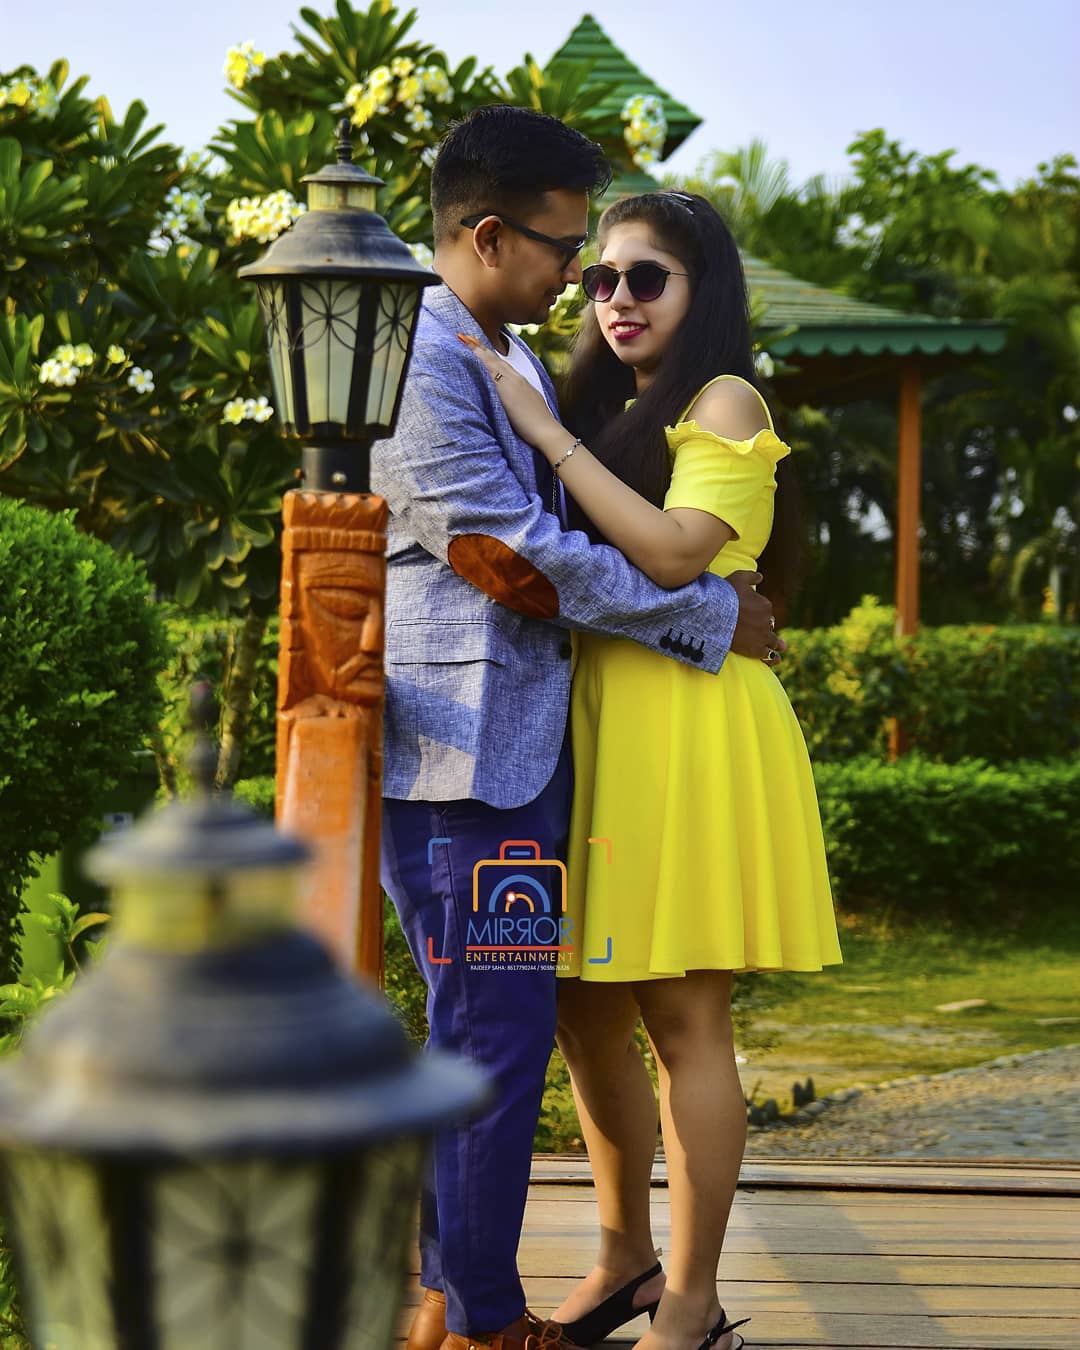 10 Captivating Pre-Wedding Photoshoot Outfit Ideas for Couples